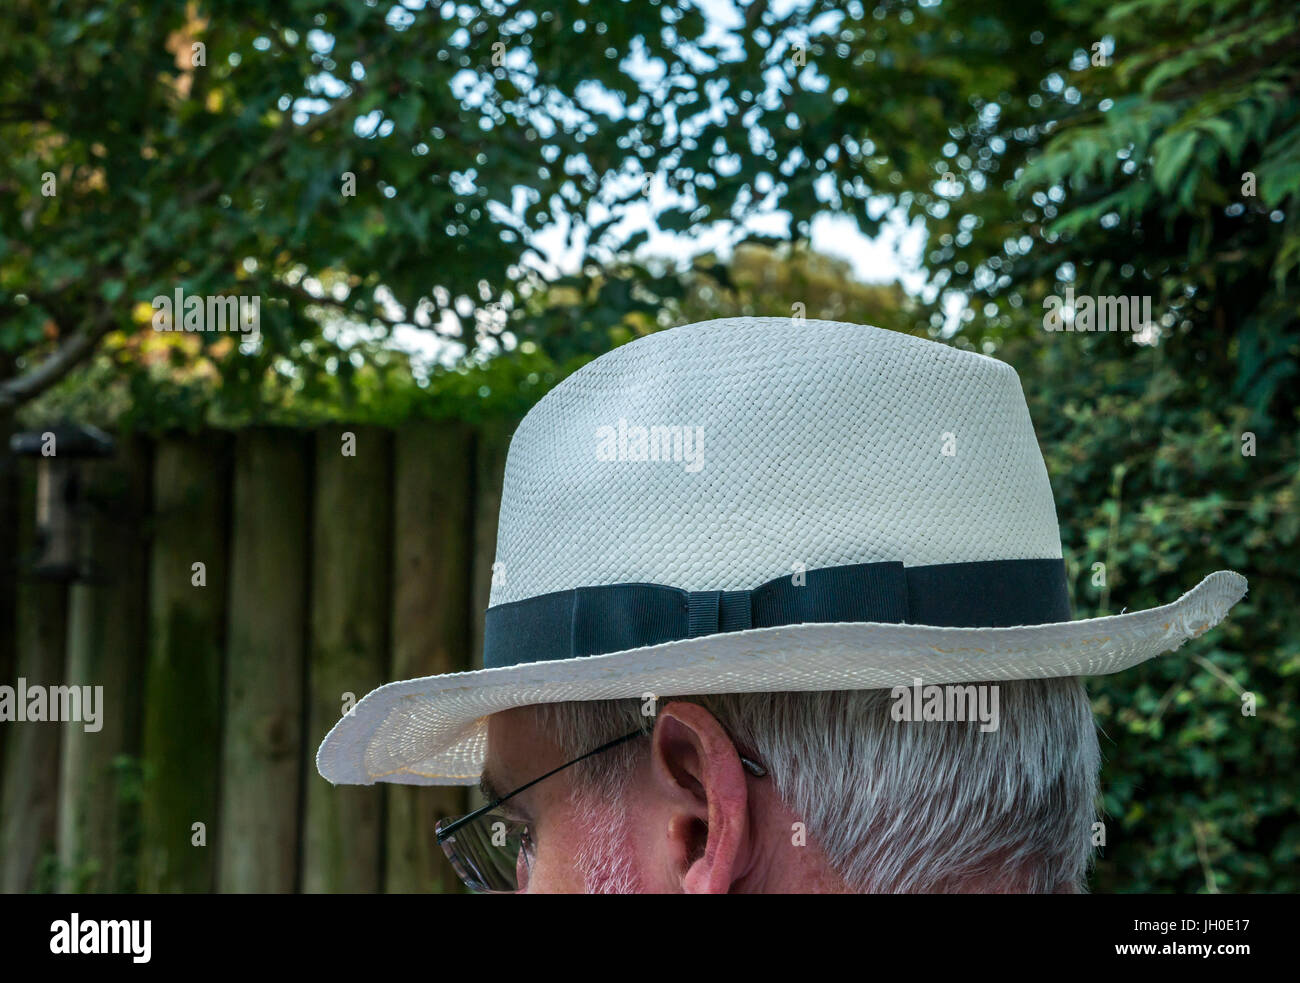 Close up of older man with white hair sitting outside ingarden wearing a Panama hat and face hidden, London, England, UK Stock Photo